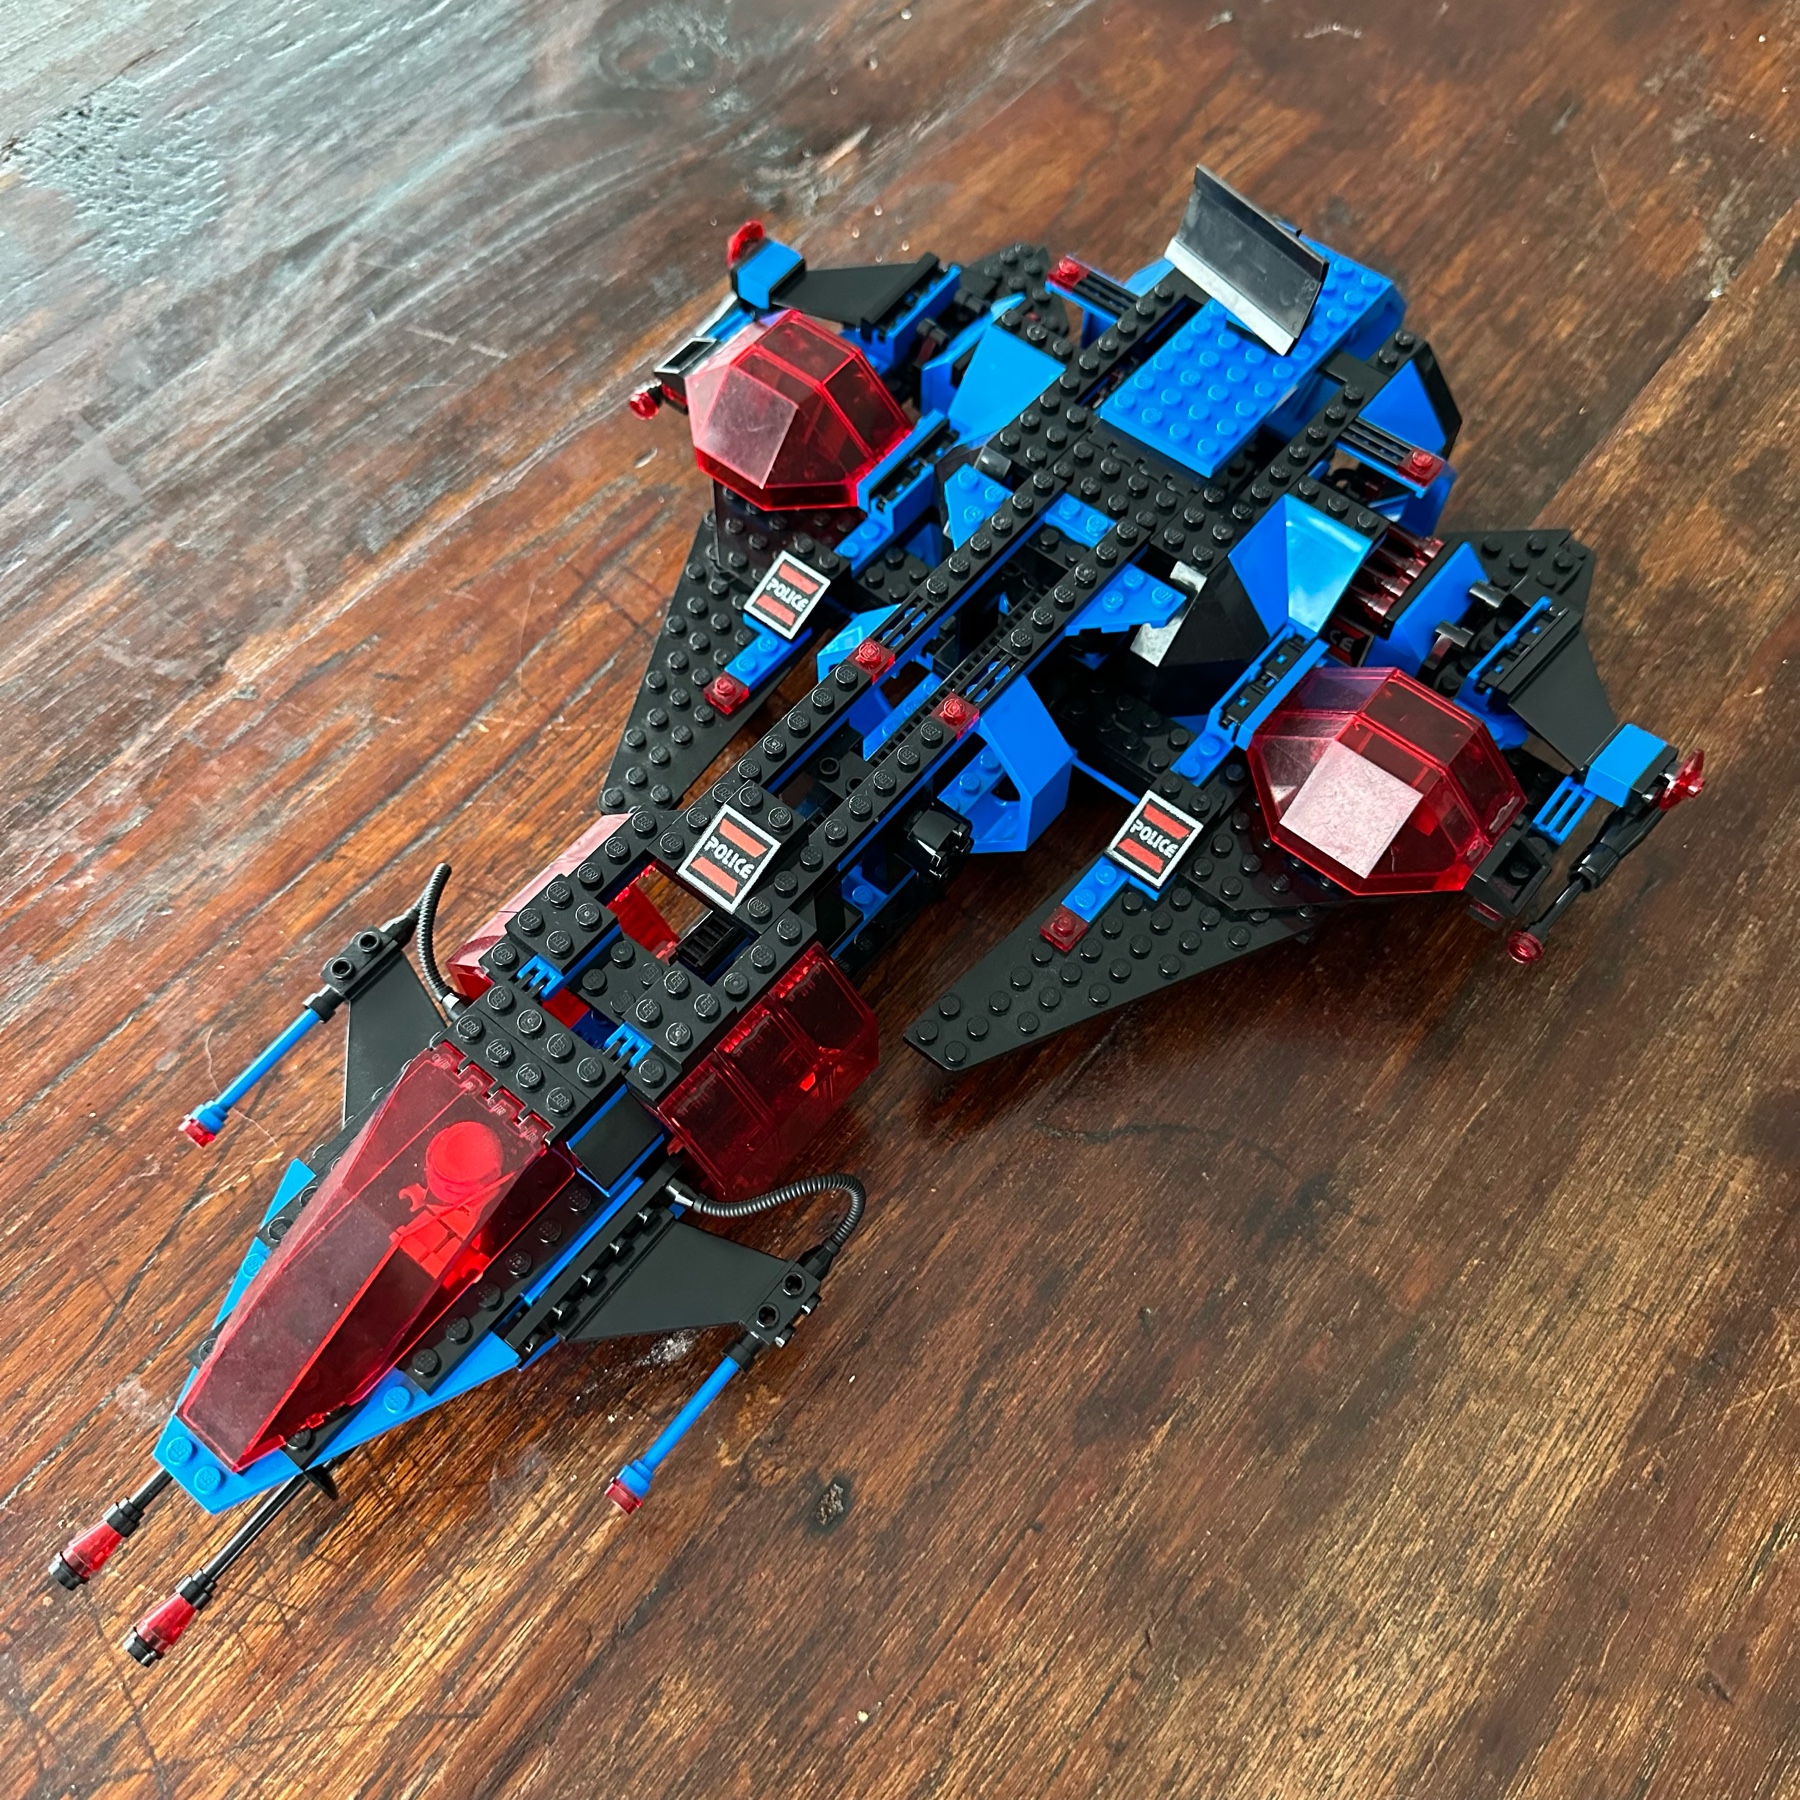 LEGO spaceship in a blue, black, and transparent red color scheme.